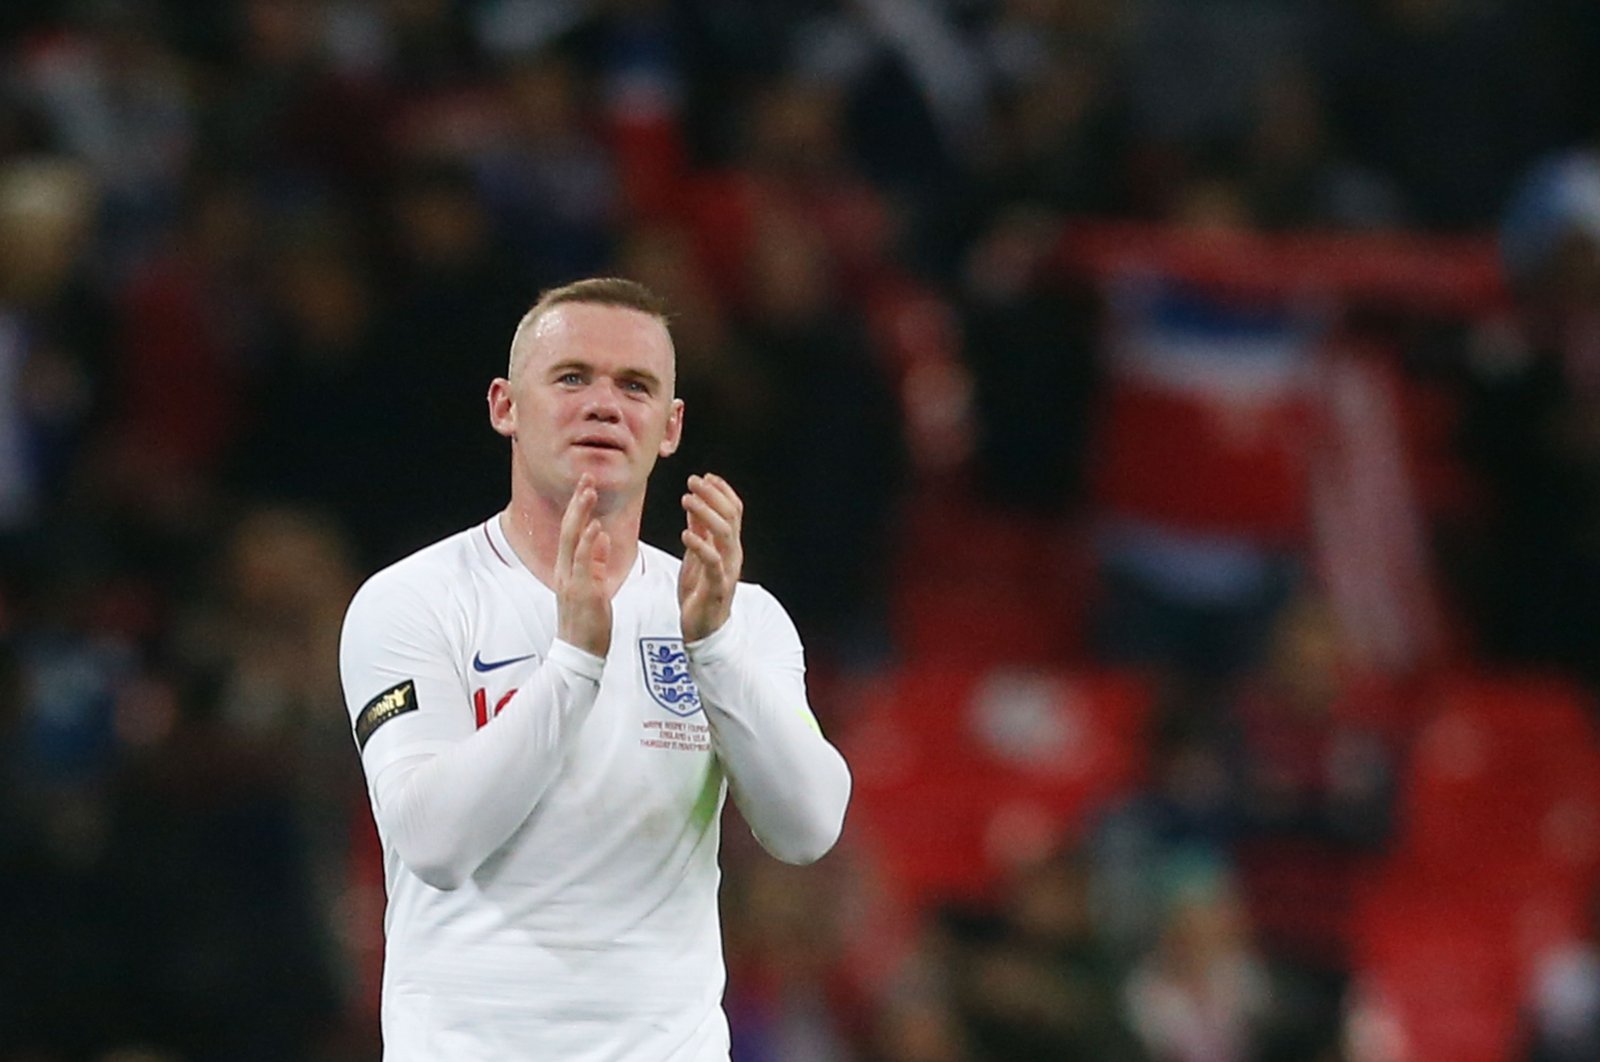 England's striker Wayne Rooney applauds after the final whistle during the international friendly football match between England and the United States at Wembley stadium in north London, Nov. 15, 2018. (AFP Photo)